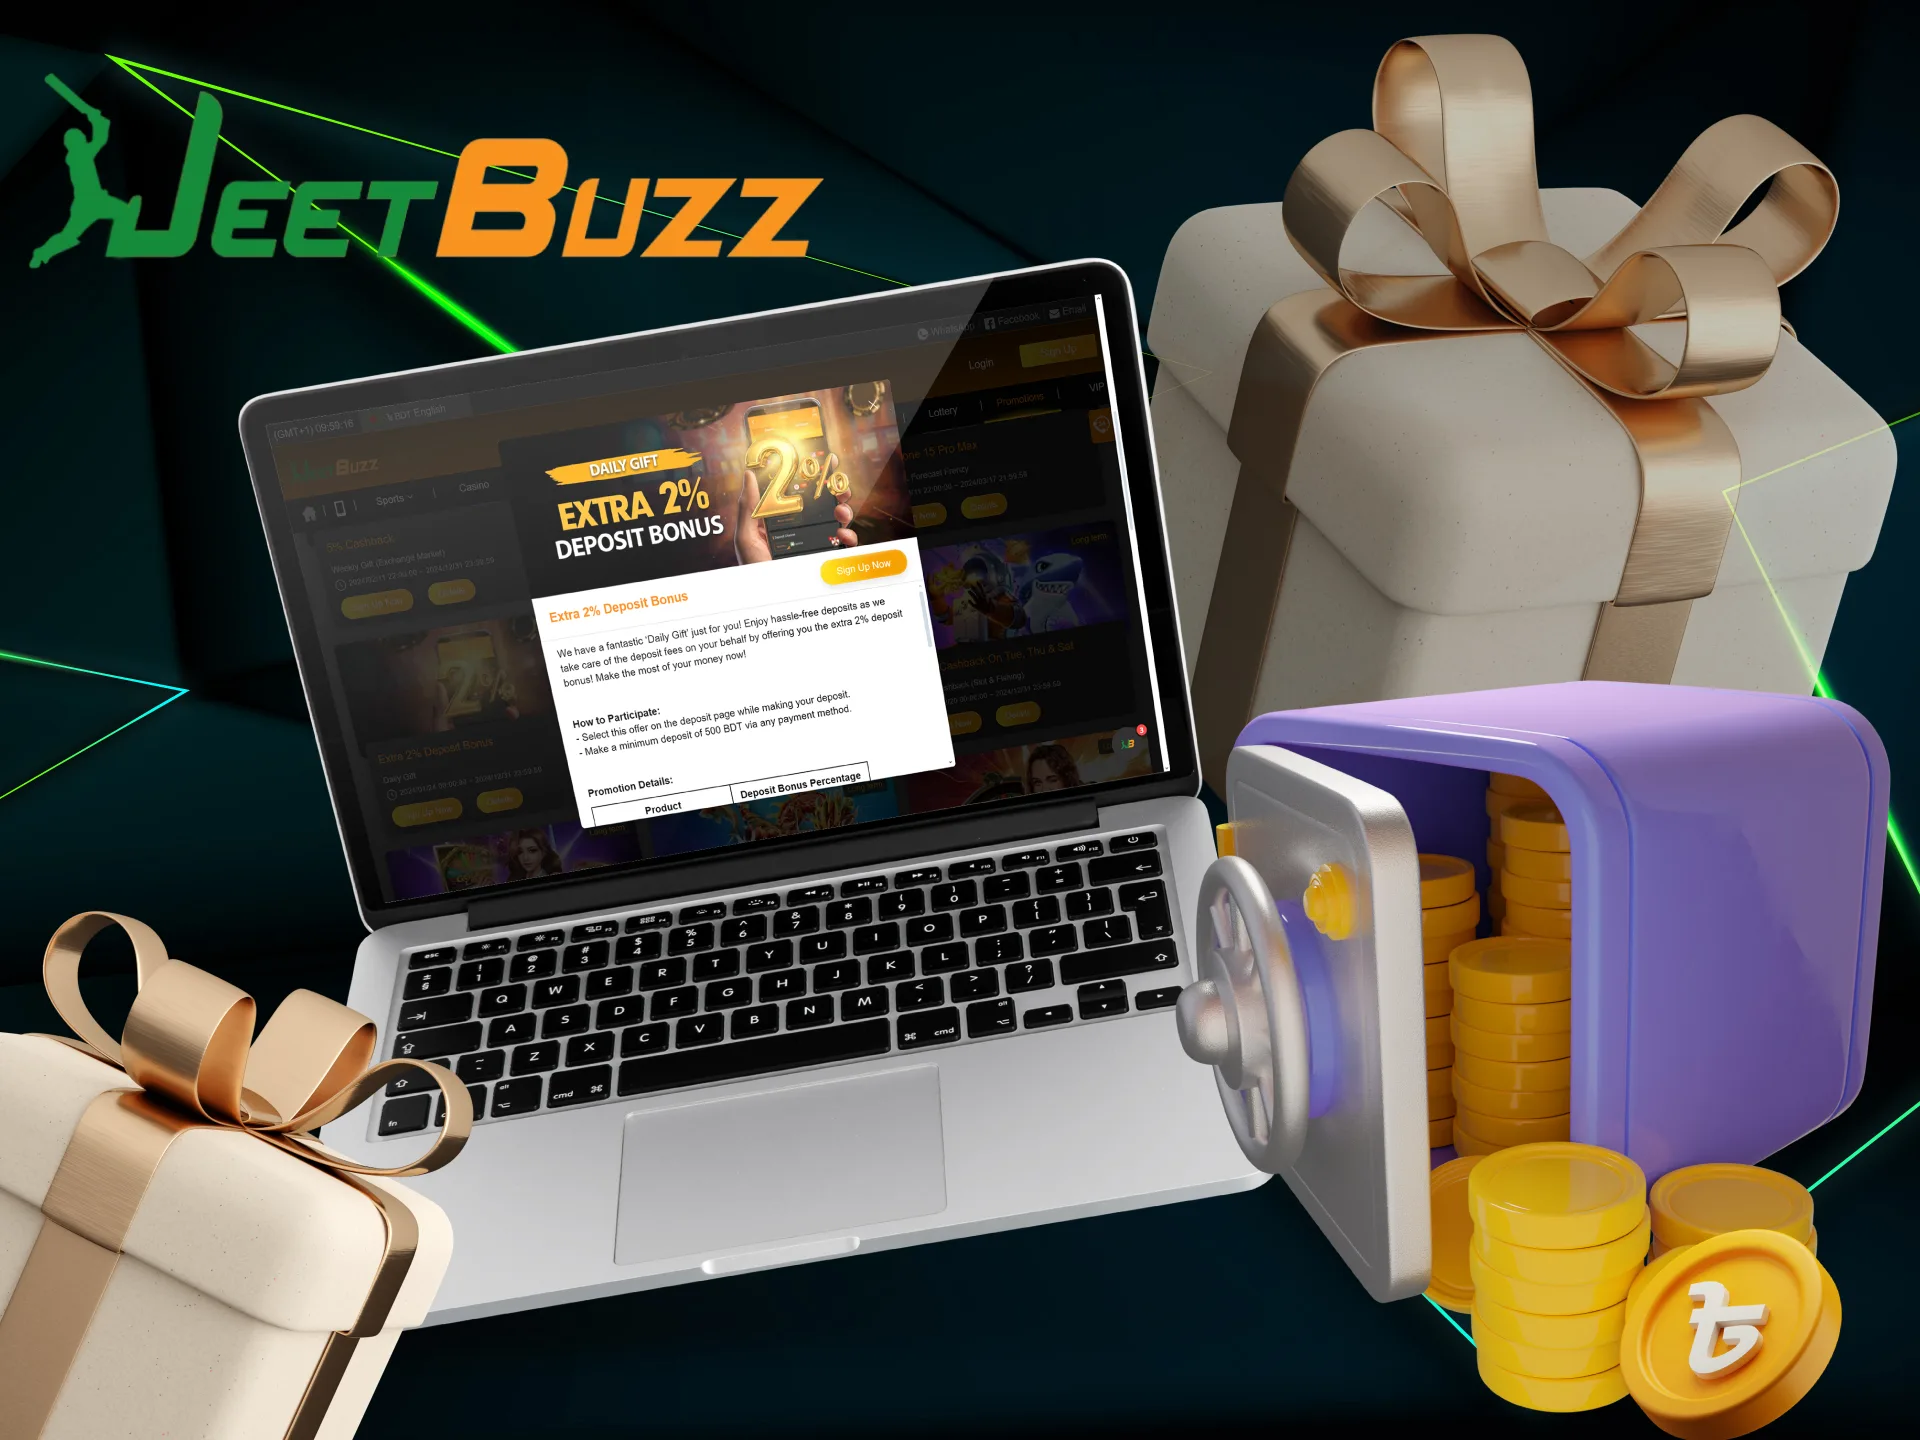 For casino fans, JeetBuzz offers exclusive bonuses.